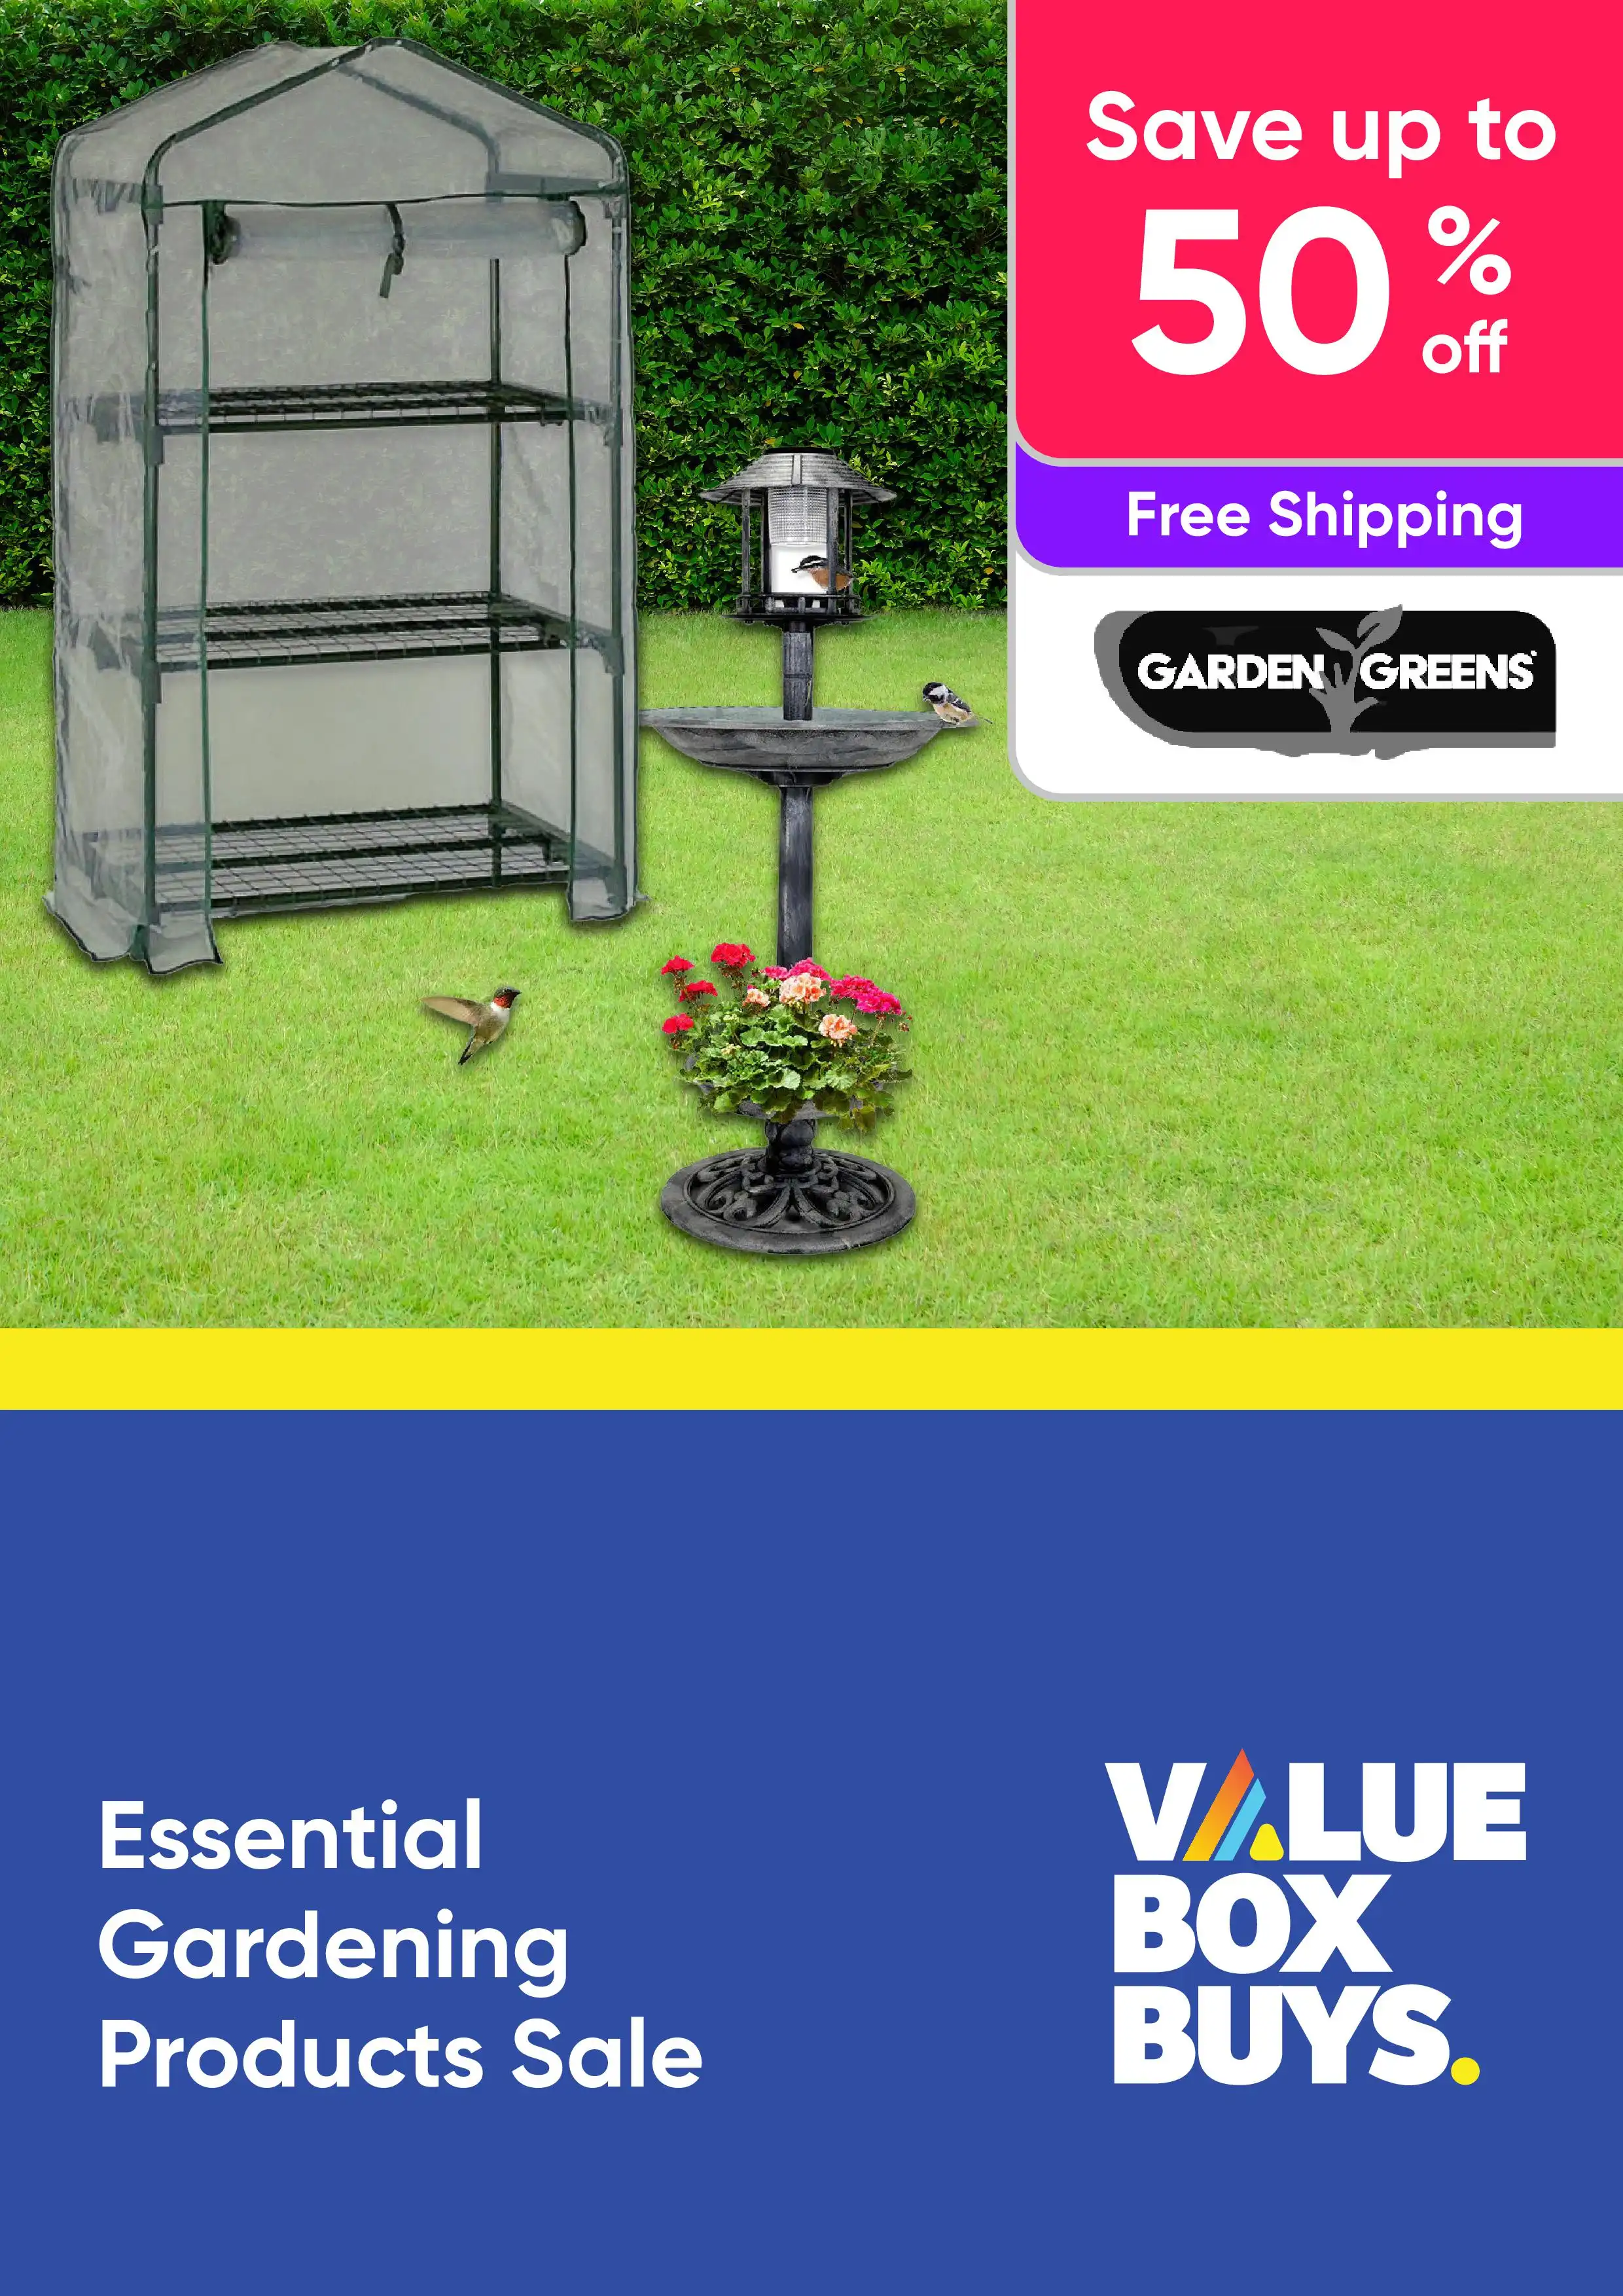 Garden Greens Essential Gardening Products Sale - Up to 50% off